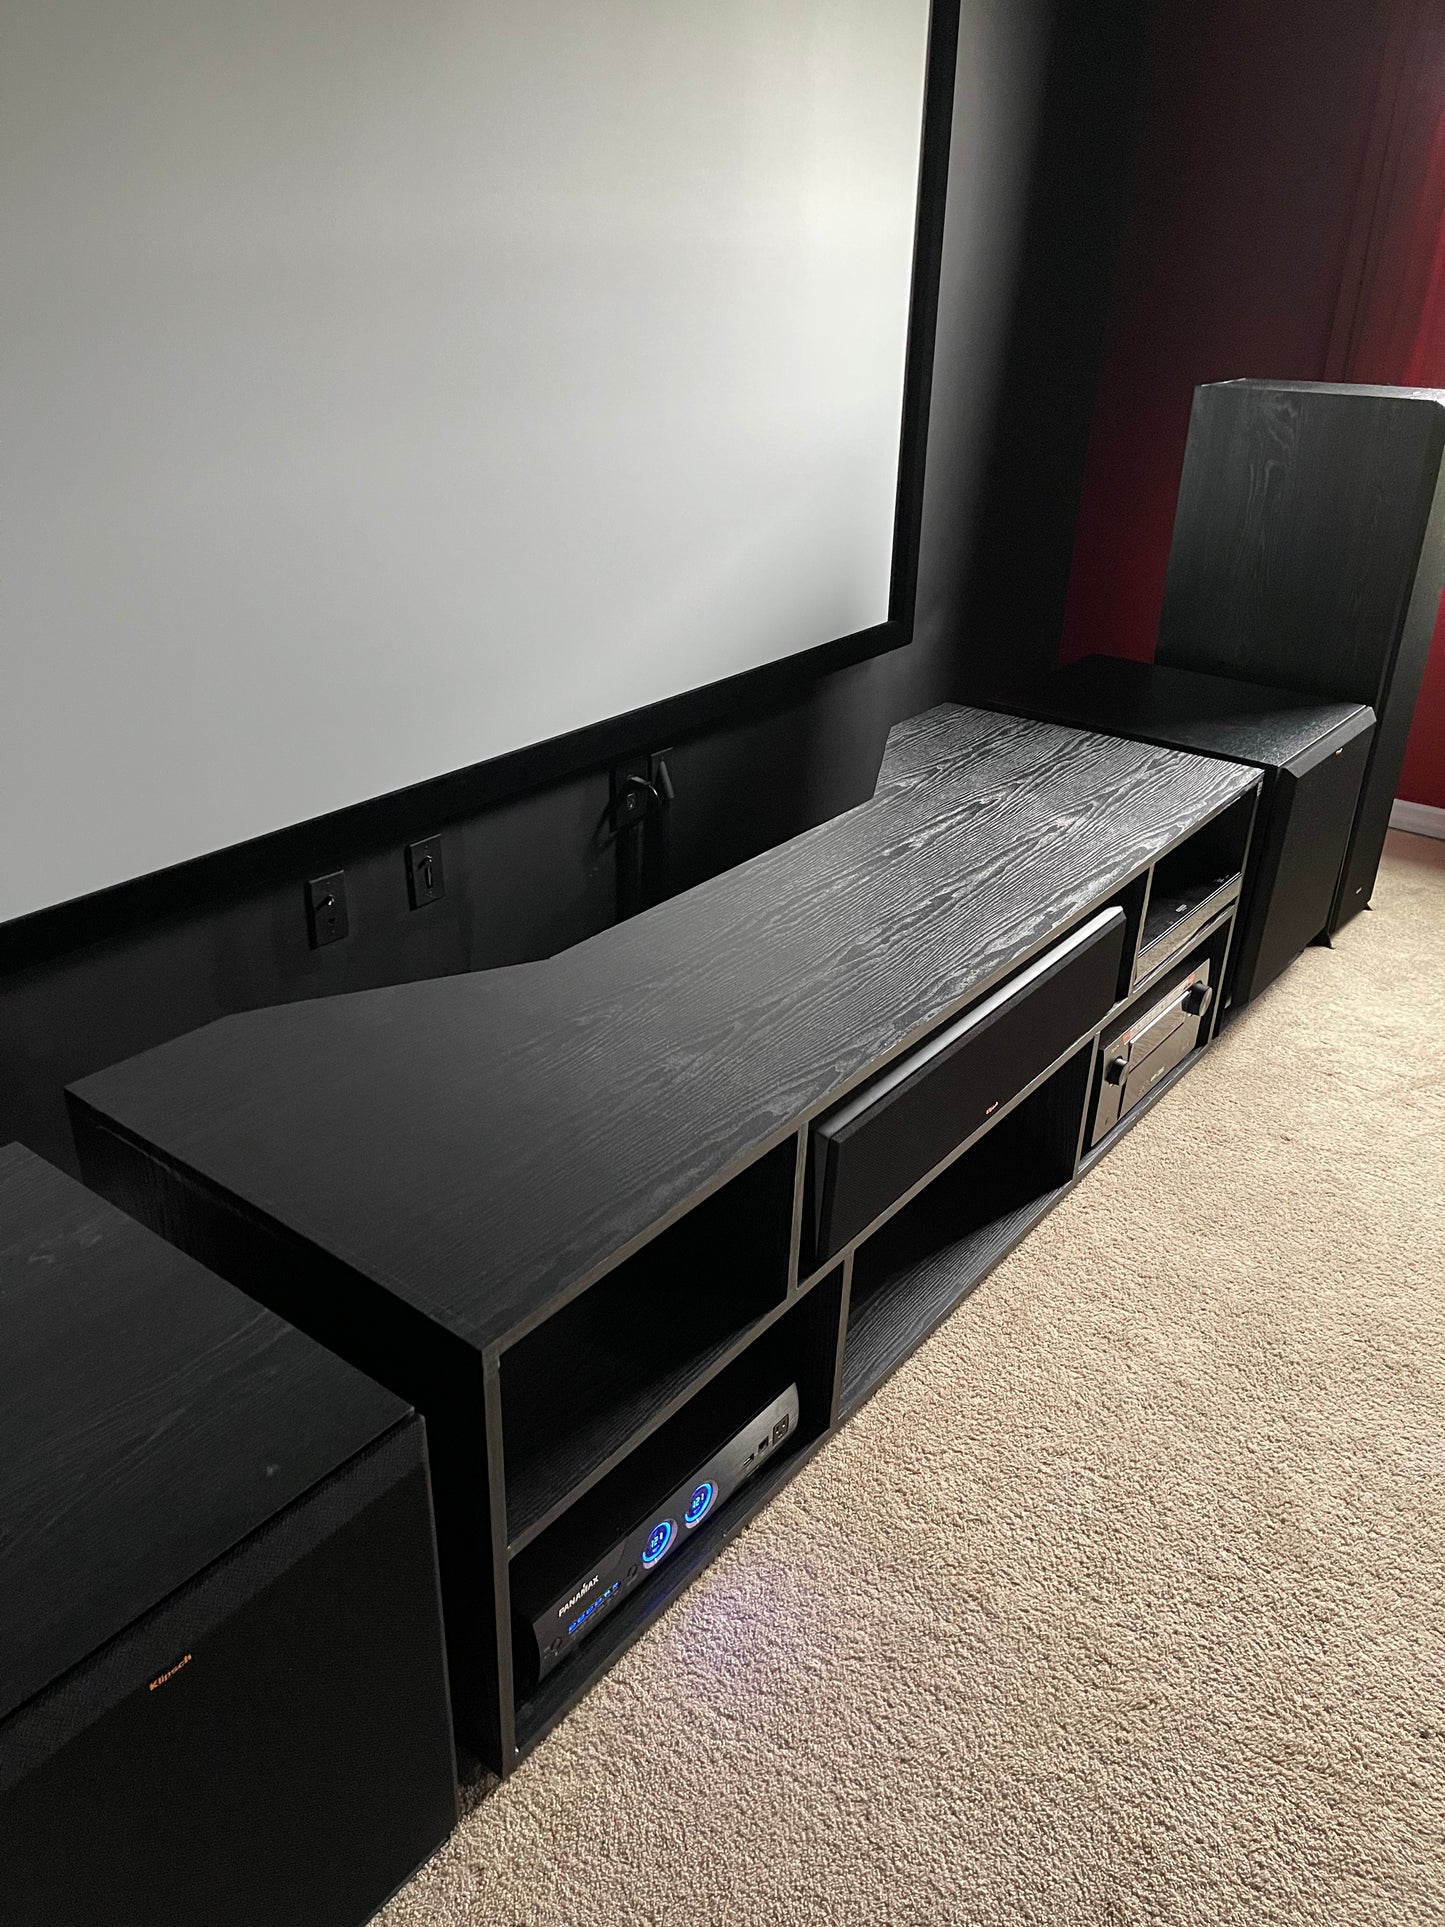 Cabinet for Ultra Short throw Projector with Center Channel